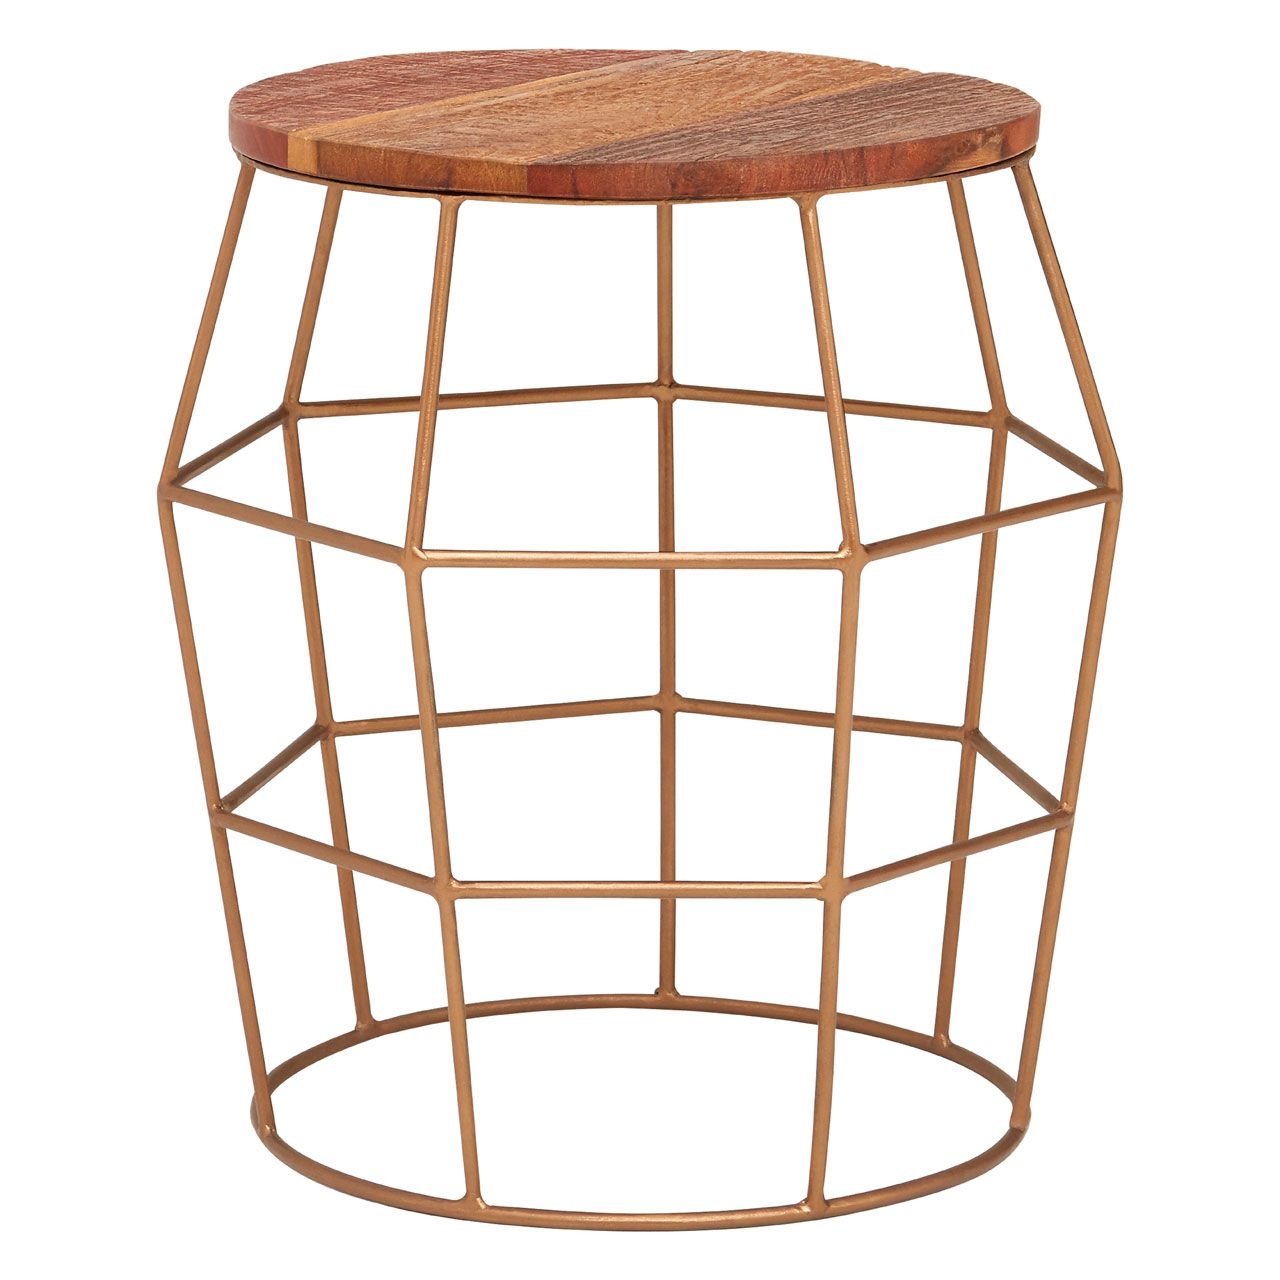 Nandri Round Wooden Side Table In Natural With Gold Metal Frame